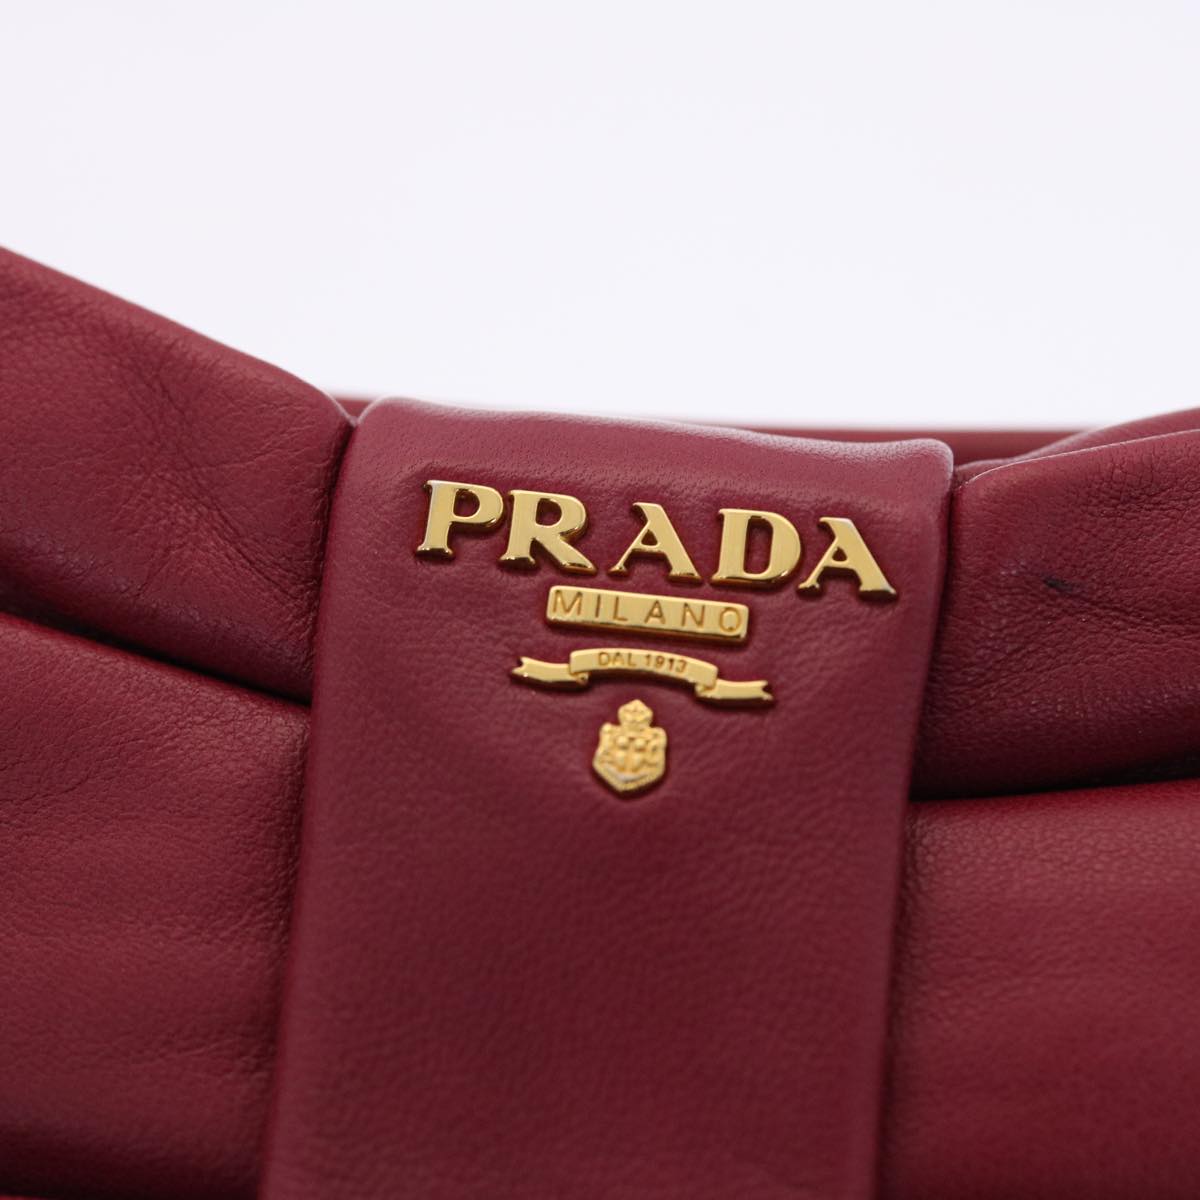 PRADA Ribbon Accessory Pouch Leather Pink Auth 49999